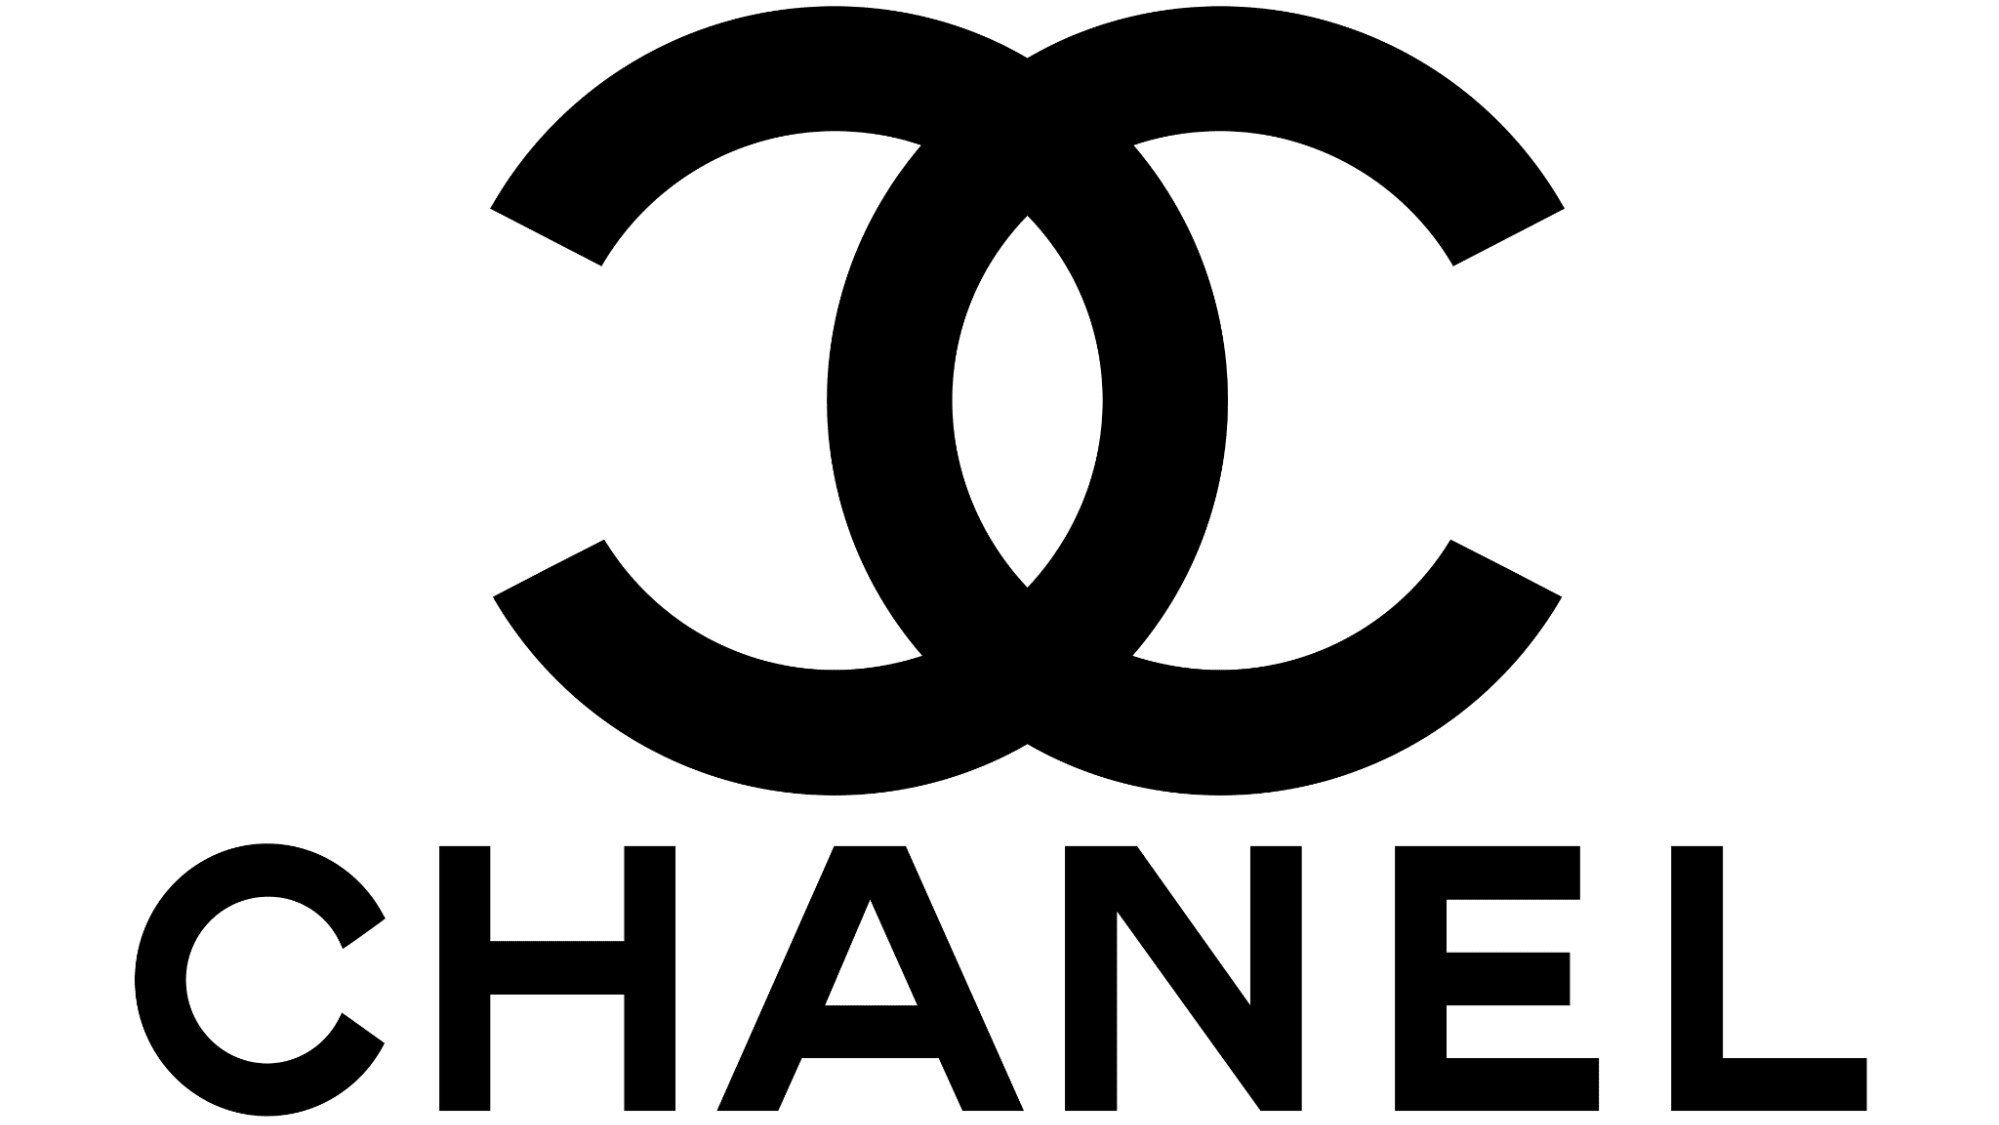 The Chanel logo represents the luxury brand’s commitment to elegance and sophistication.